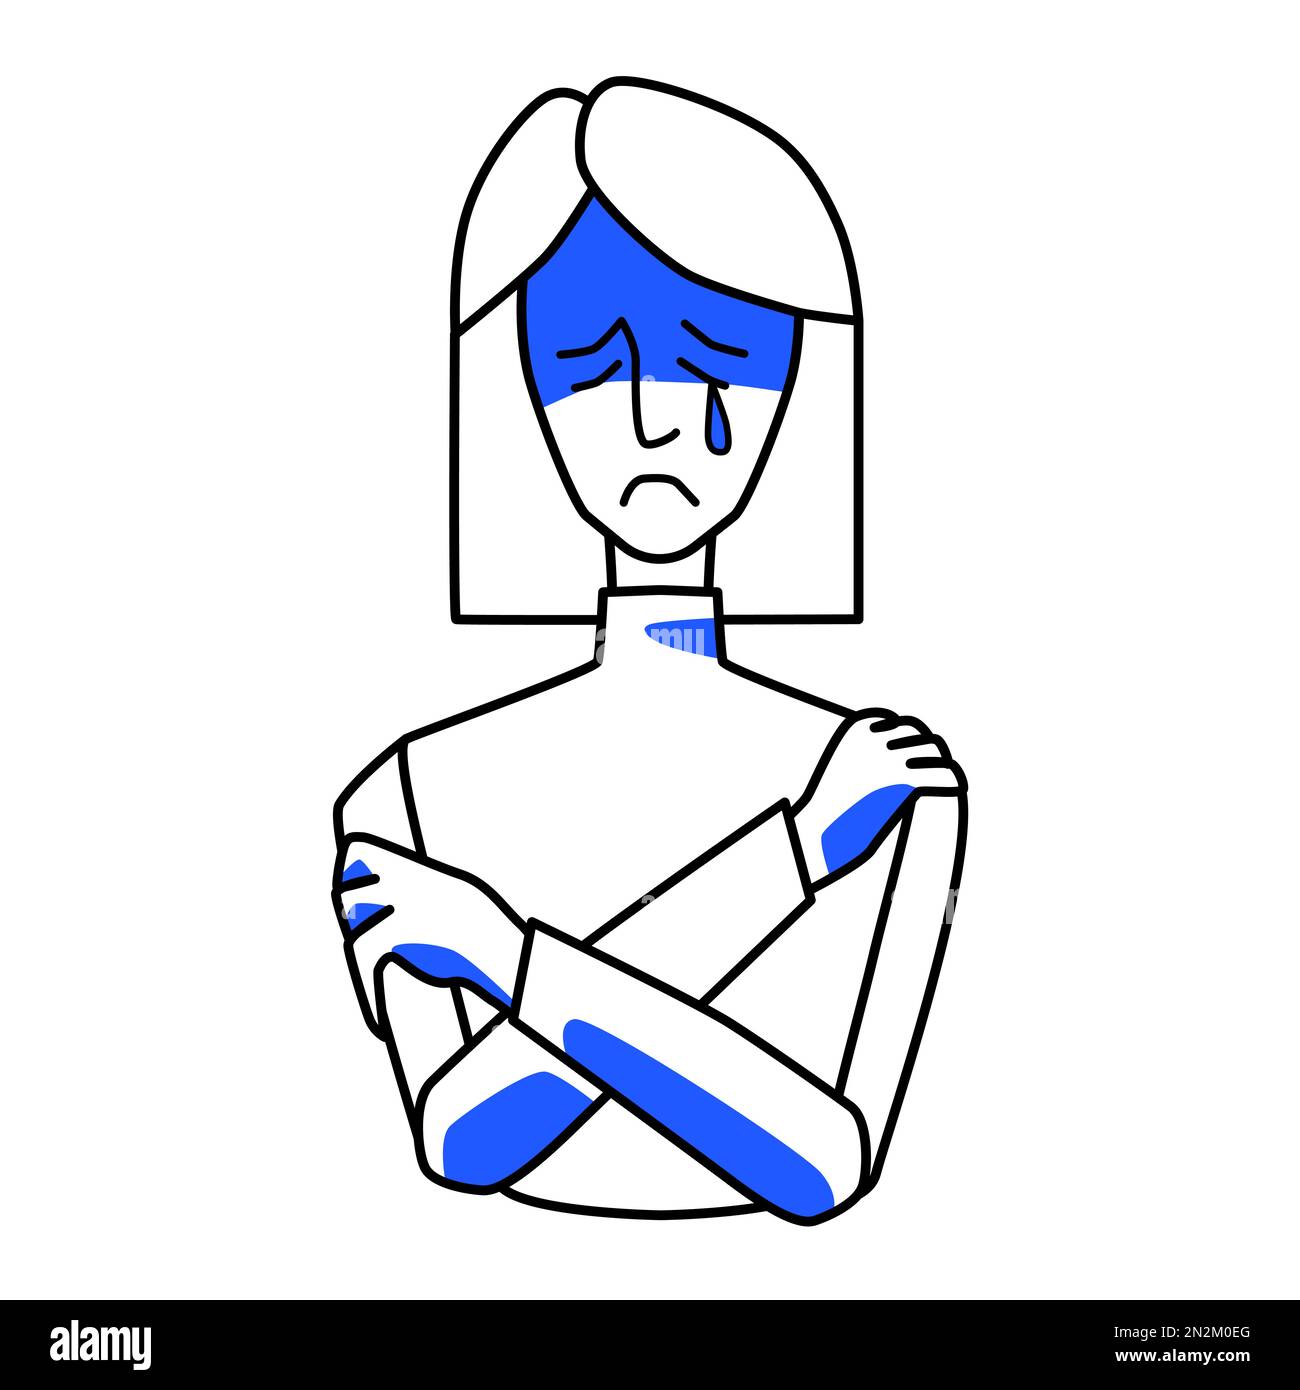 Sad woman, emotion of sorrow. Melancholy of maid, half body drawing, depressed female with tears, crying melancholy, despair and grief. Line art with Stock Vector